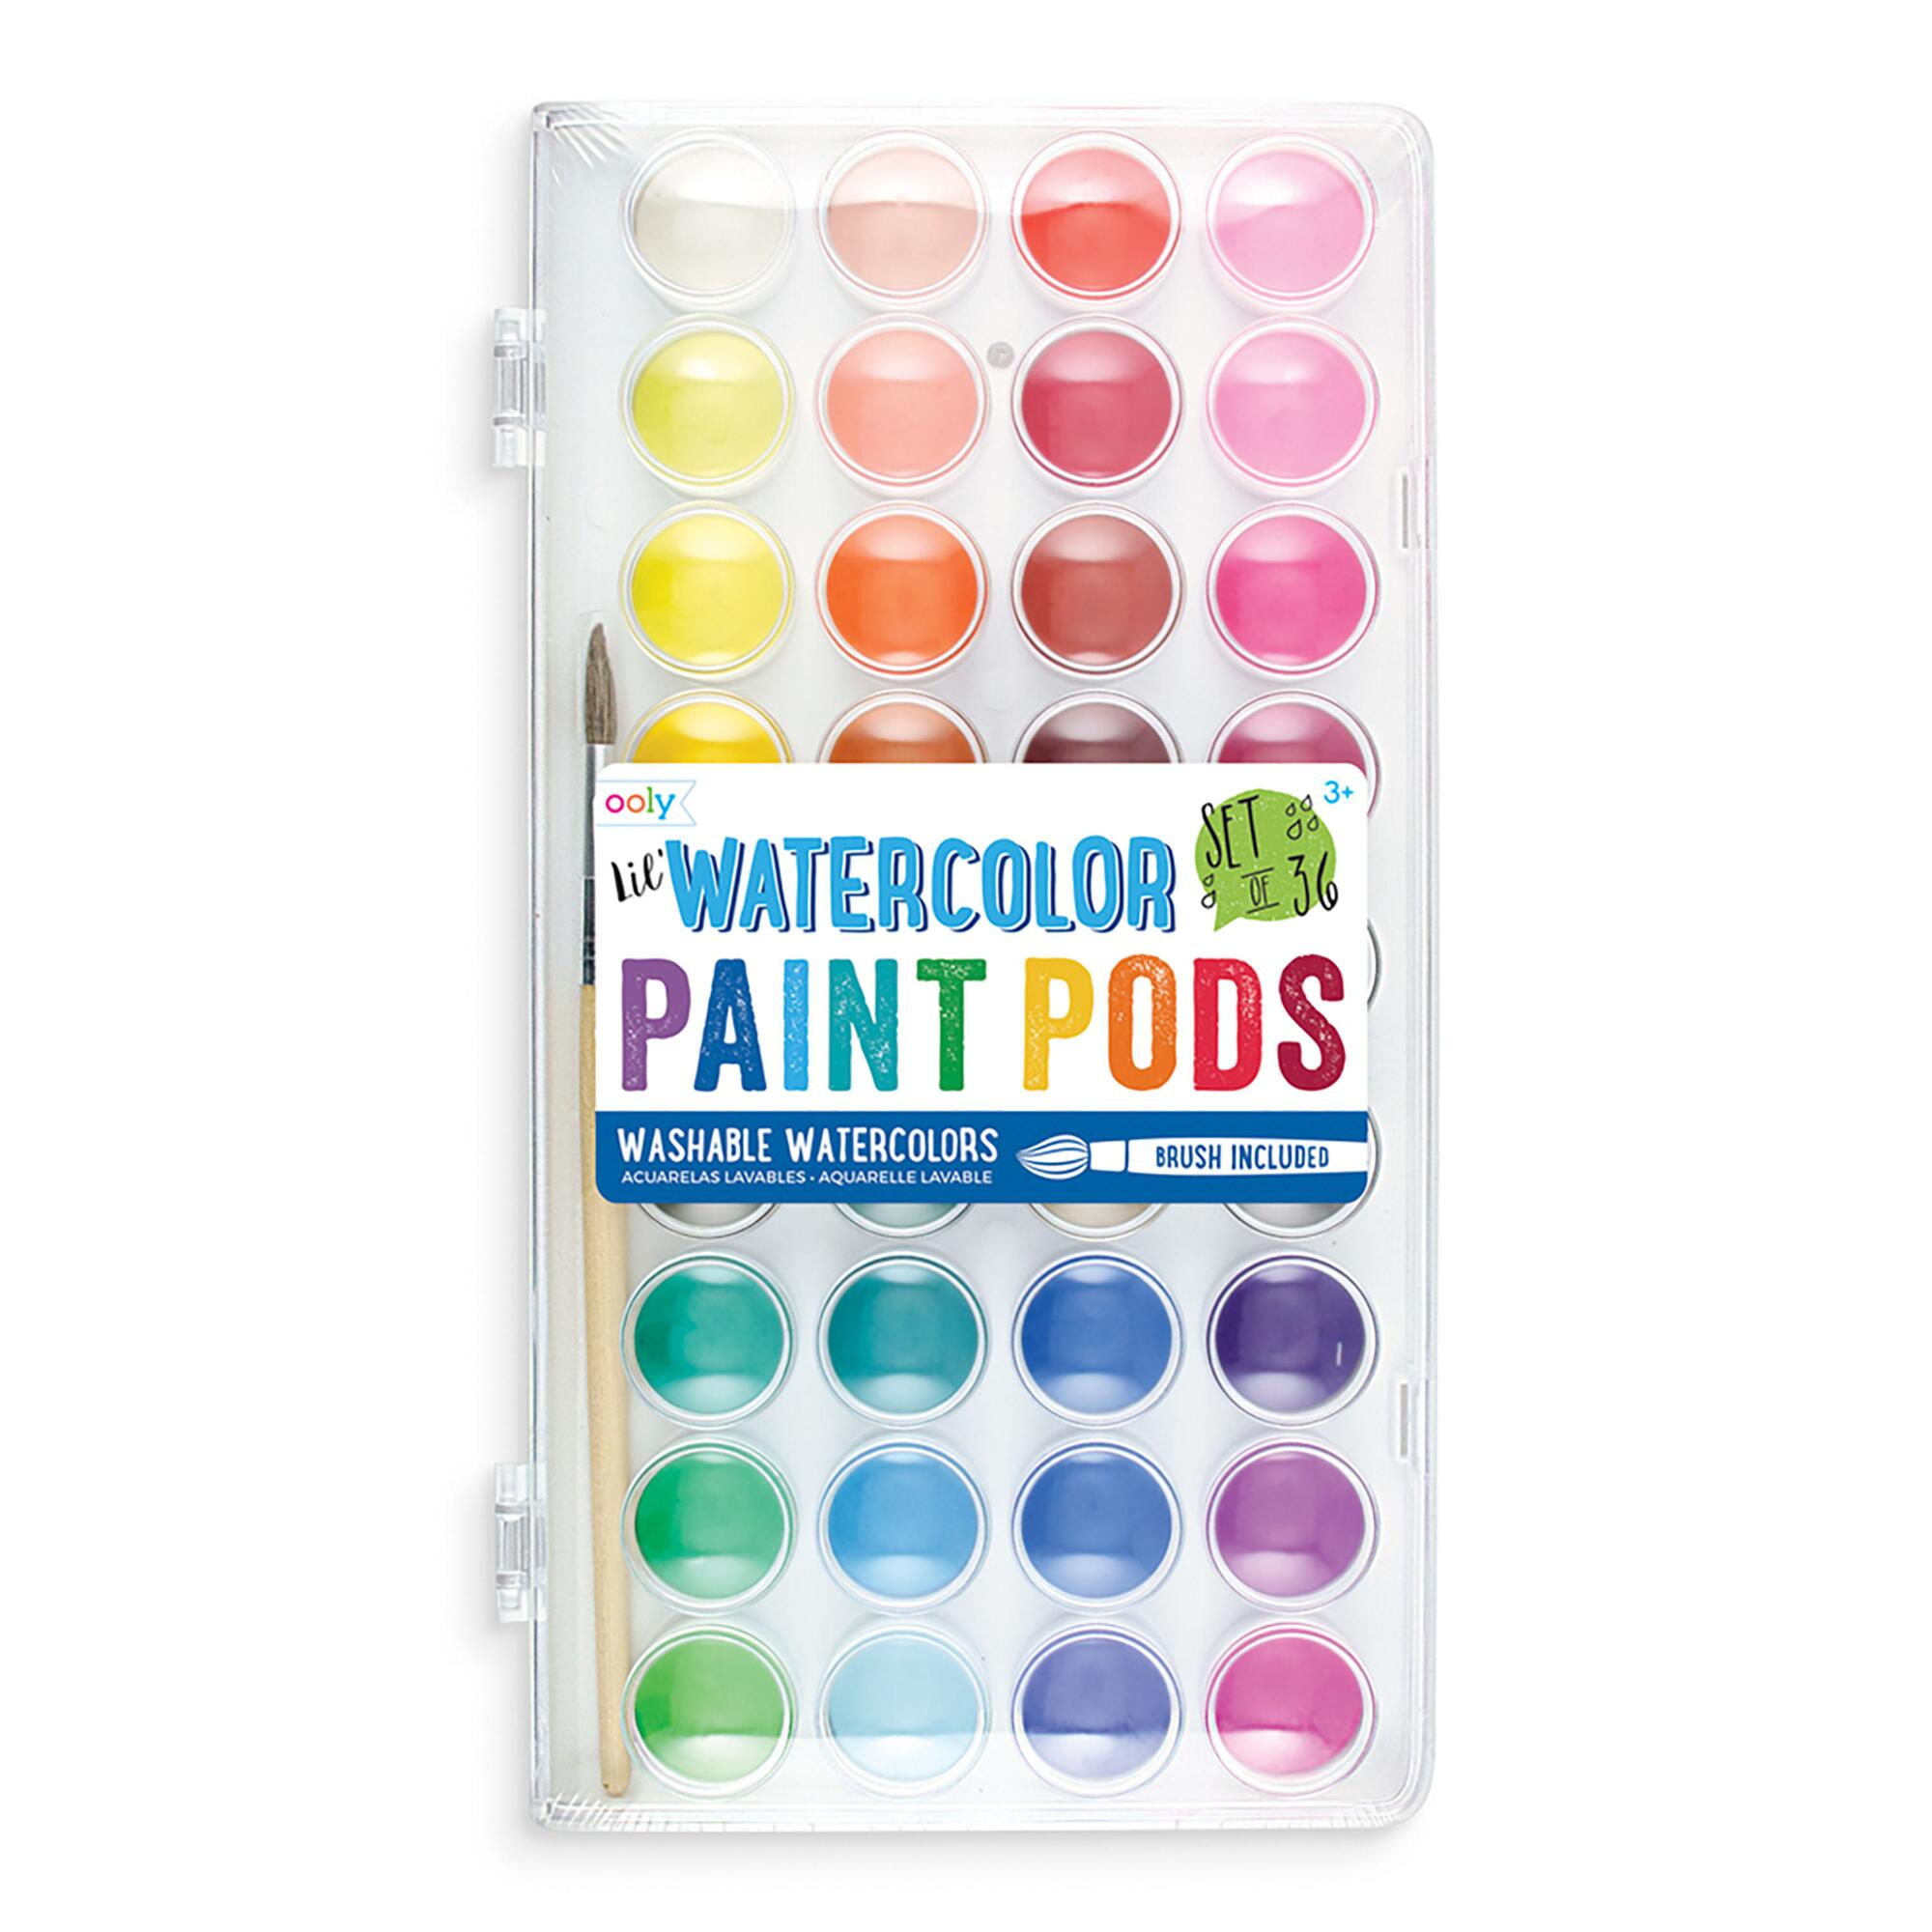 Ooly Washable Watercolor Paint Pods 36 Count by World Market